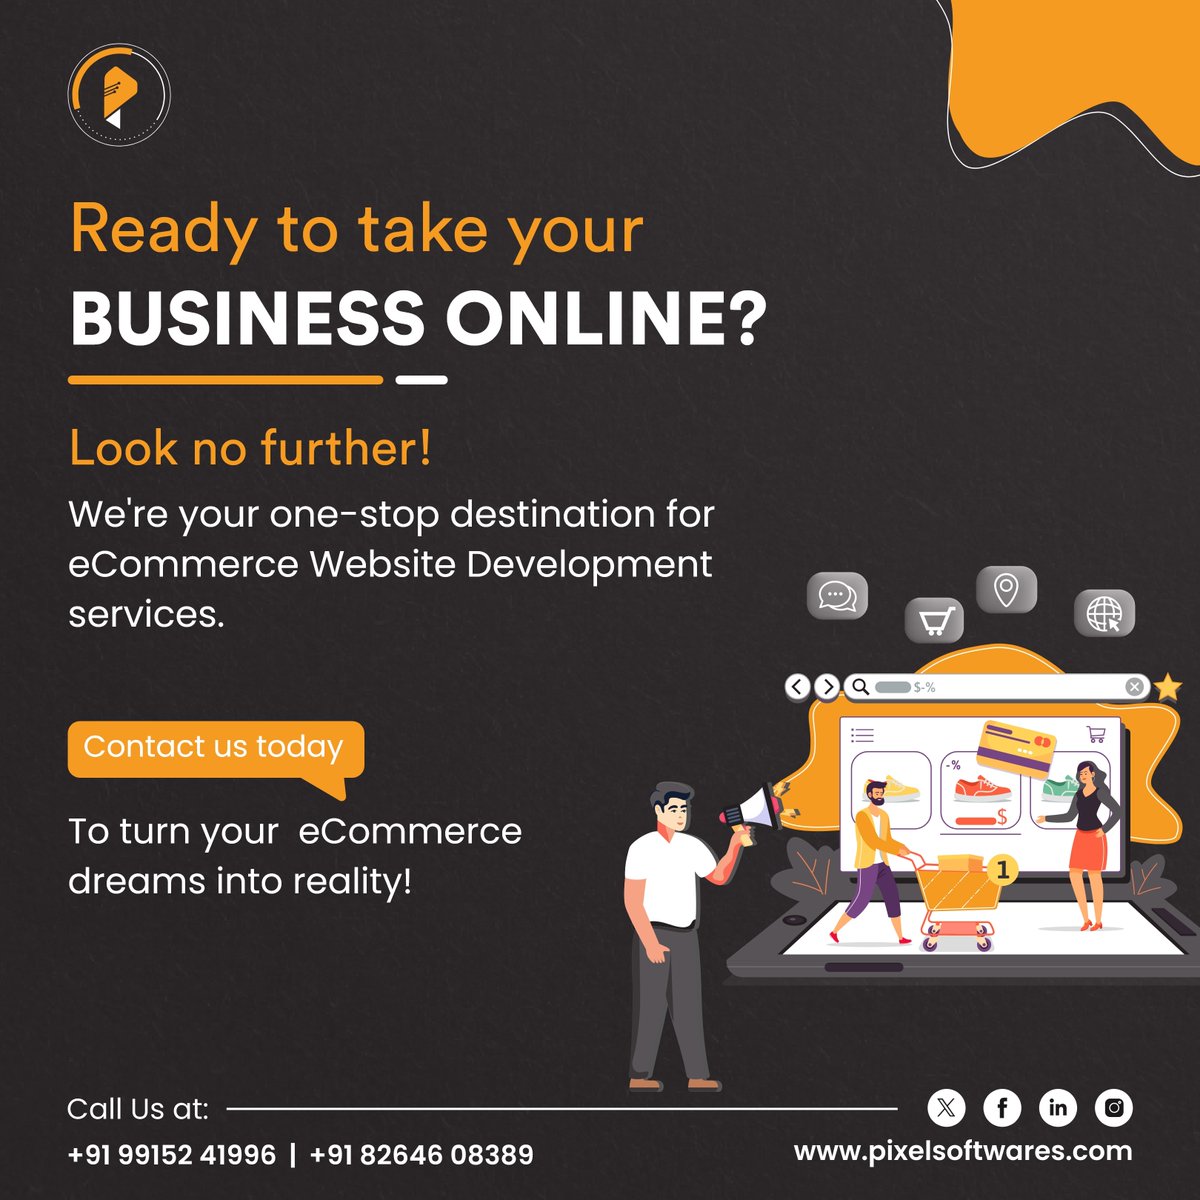 Looking to take your business online? Our #eCommerce #Website #Development services are the ultimate solution, whether you're starting from scratch or revamping your existing platform. Contact us today to turn your eCommerce dreams into reality.

#webdesign #webdesignservices